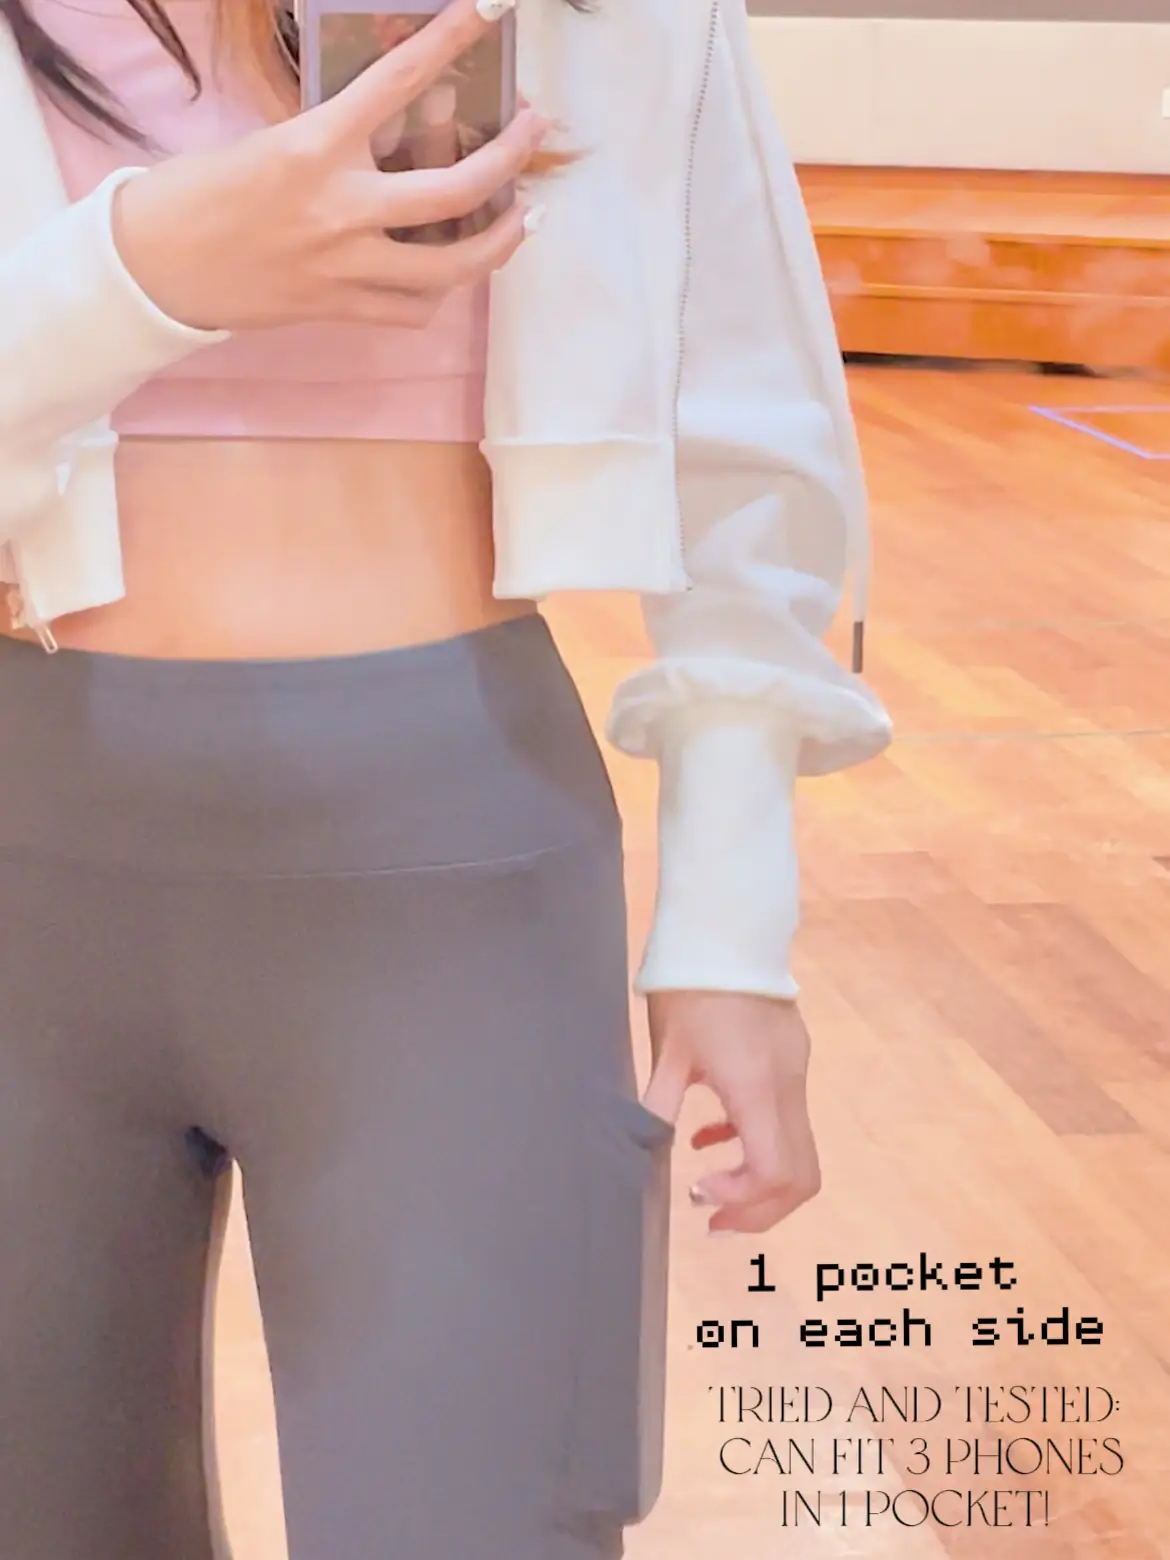 athleisure wear - yoga pants with pockets?😮‍💨